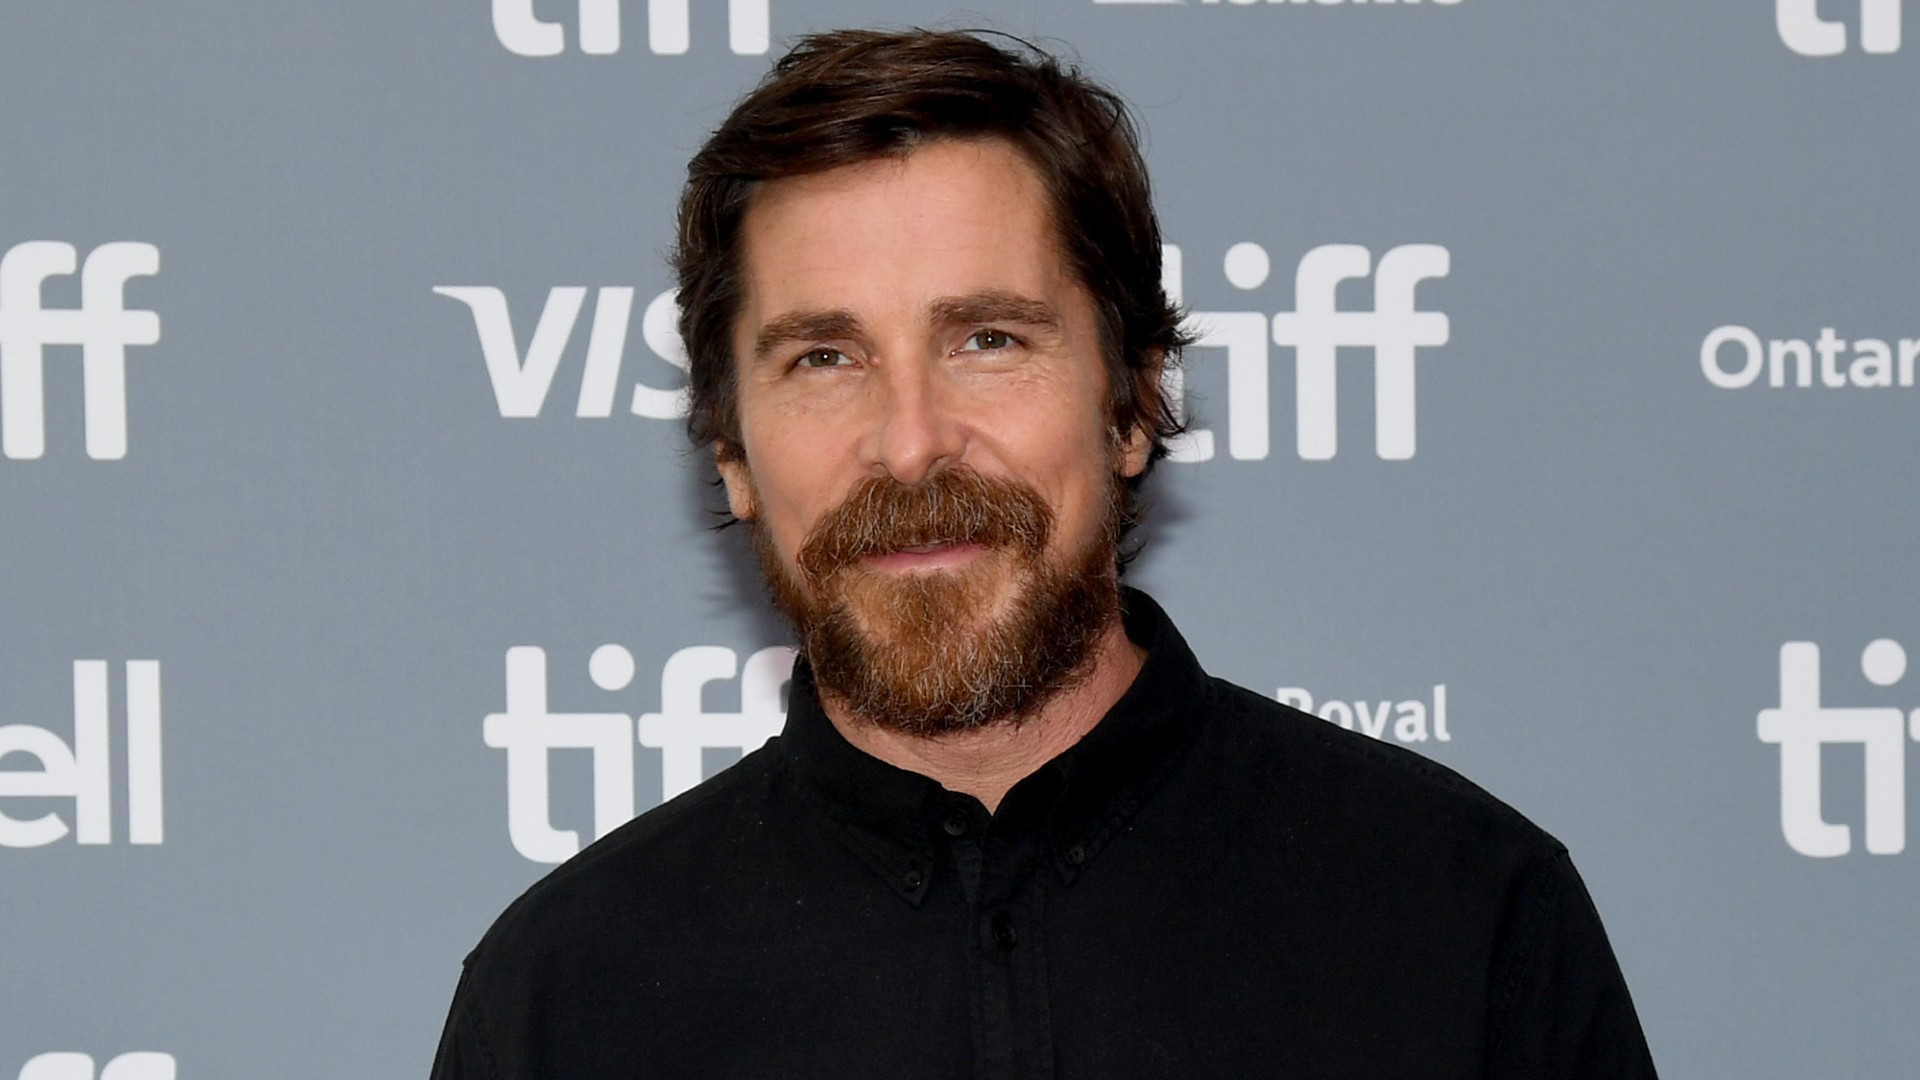 WATCH: Christian Bale Turns Detective in 'The Pale Blue Eye' Trailer